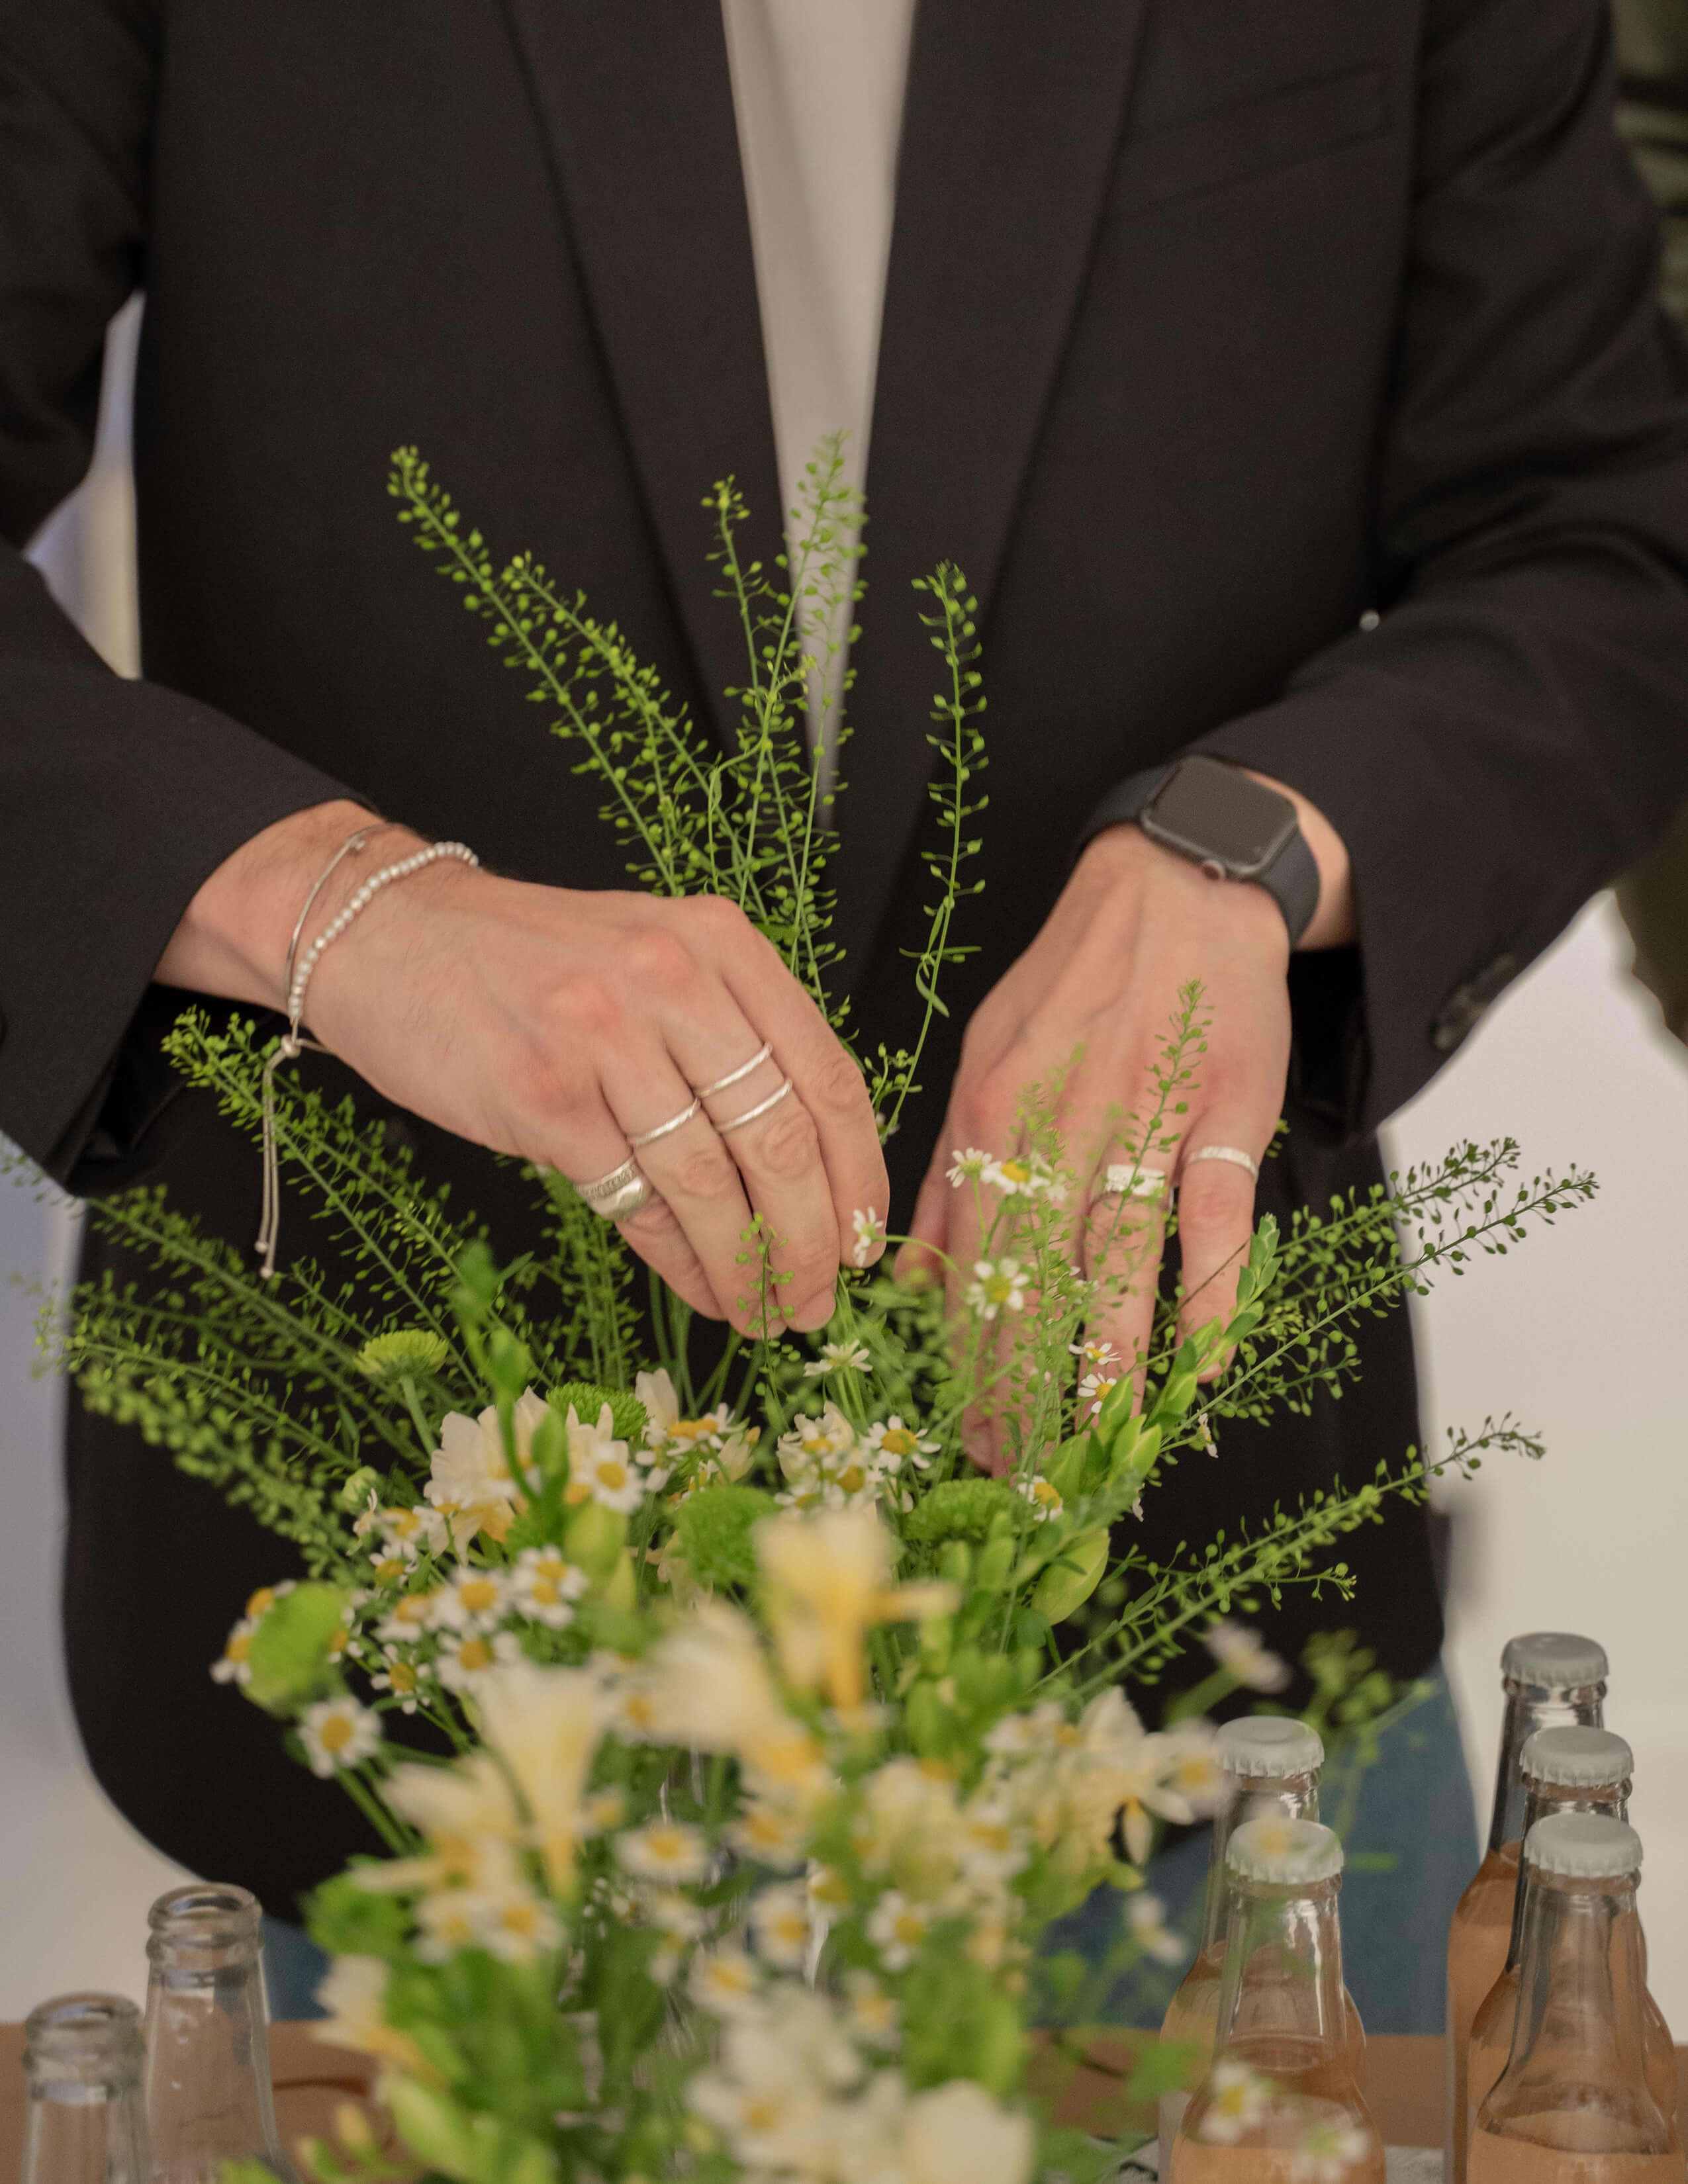 A person with a black blazer organises the plants and flowers next to bottles of alcoholic drinks.